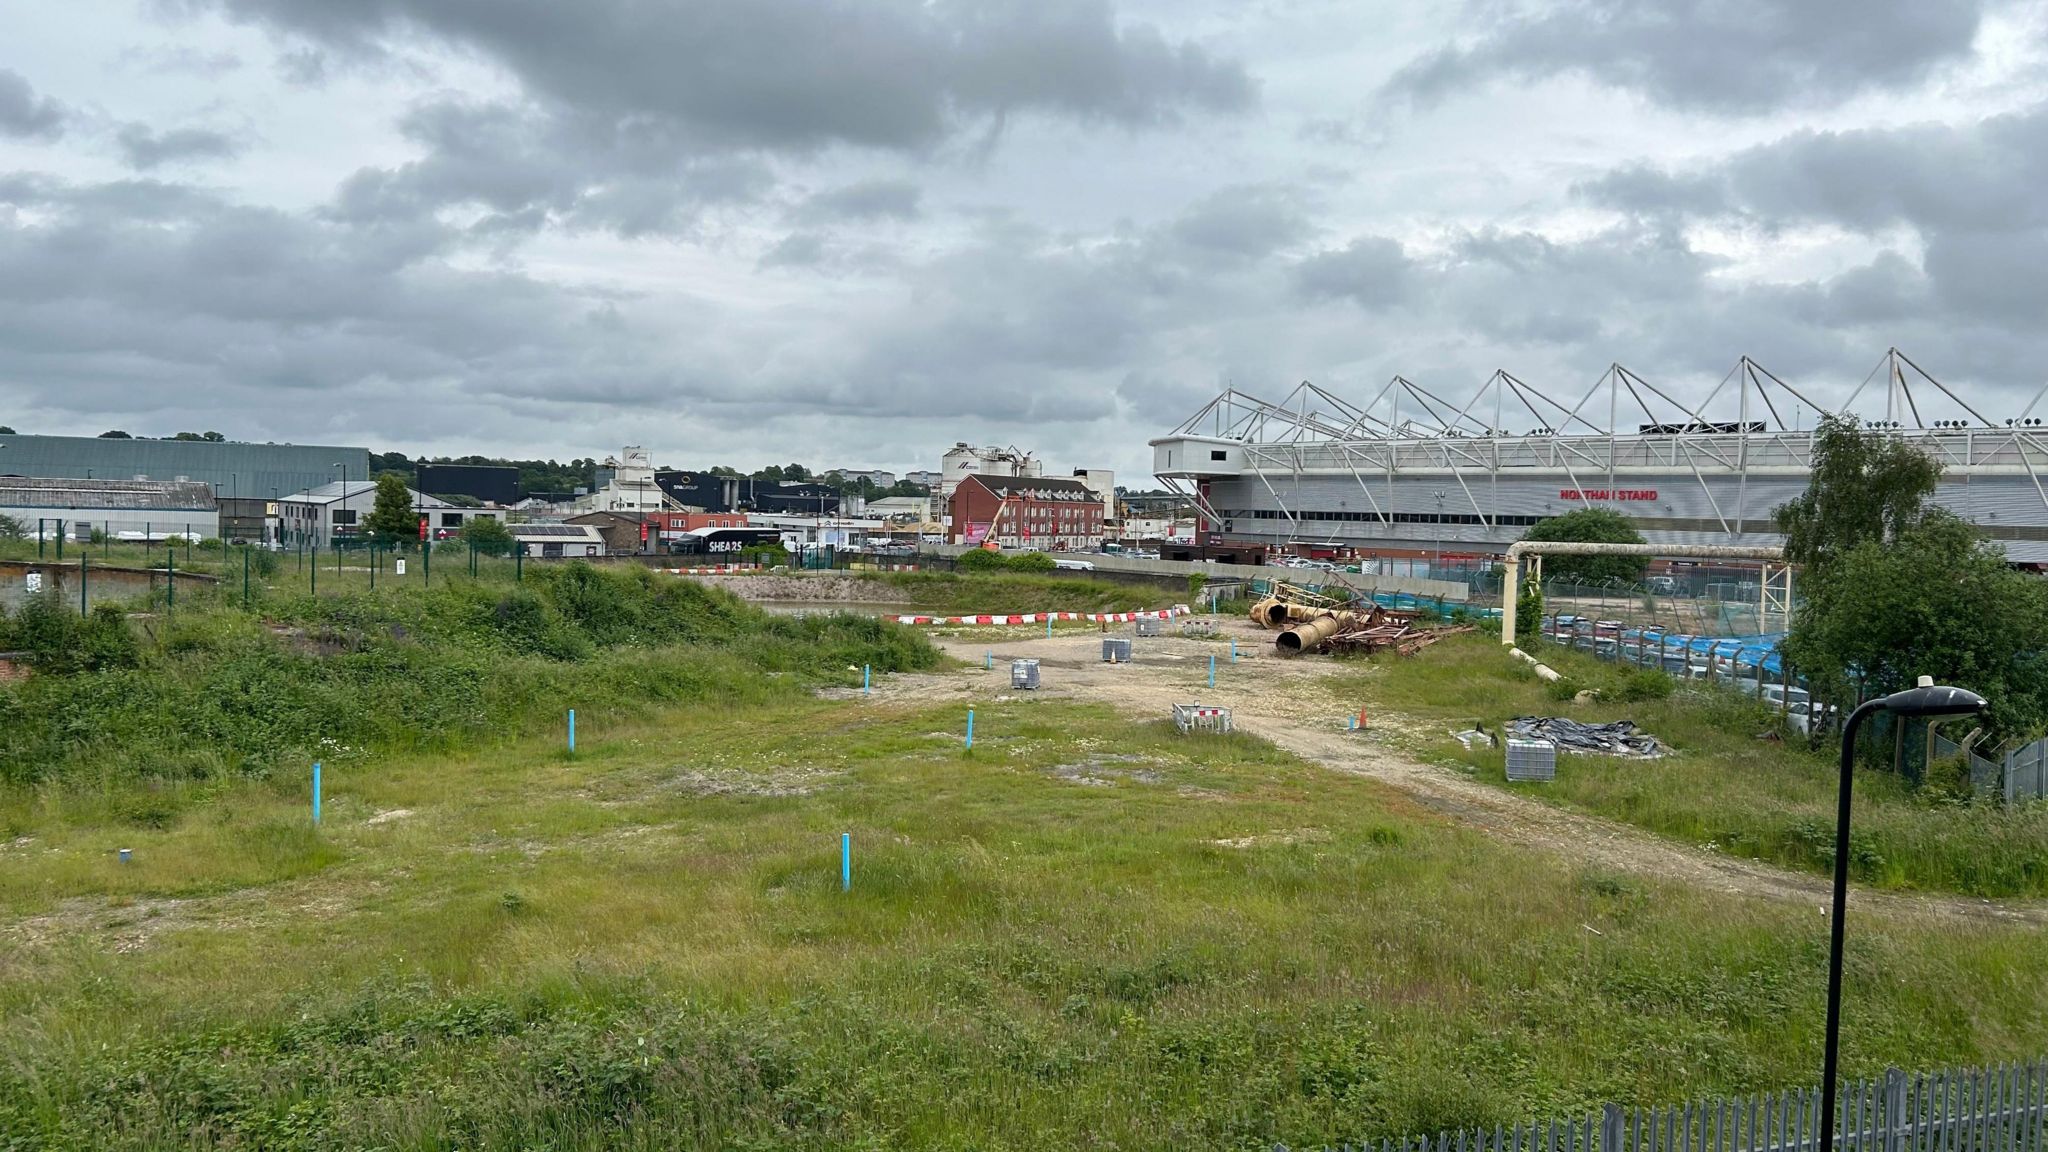 An empty plot of land with a few bits of debris littered across it and some sparse vegetation, with St Mary's stadium in the background